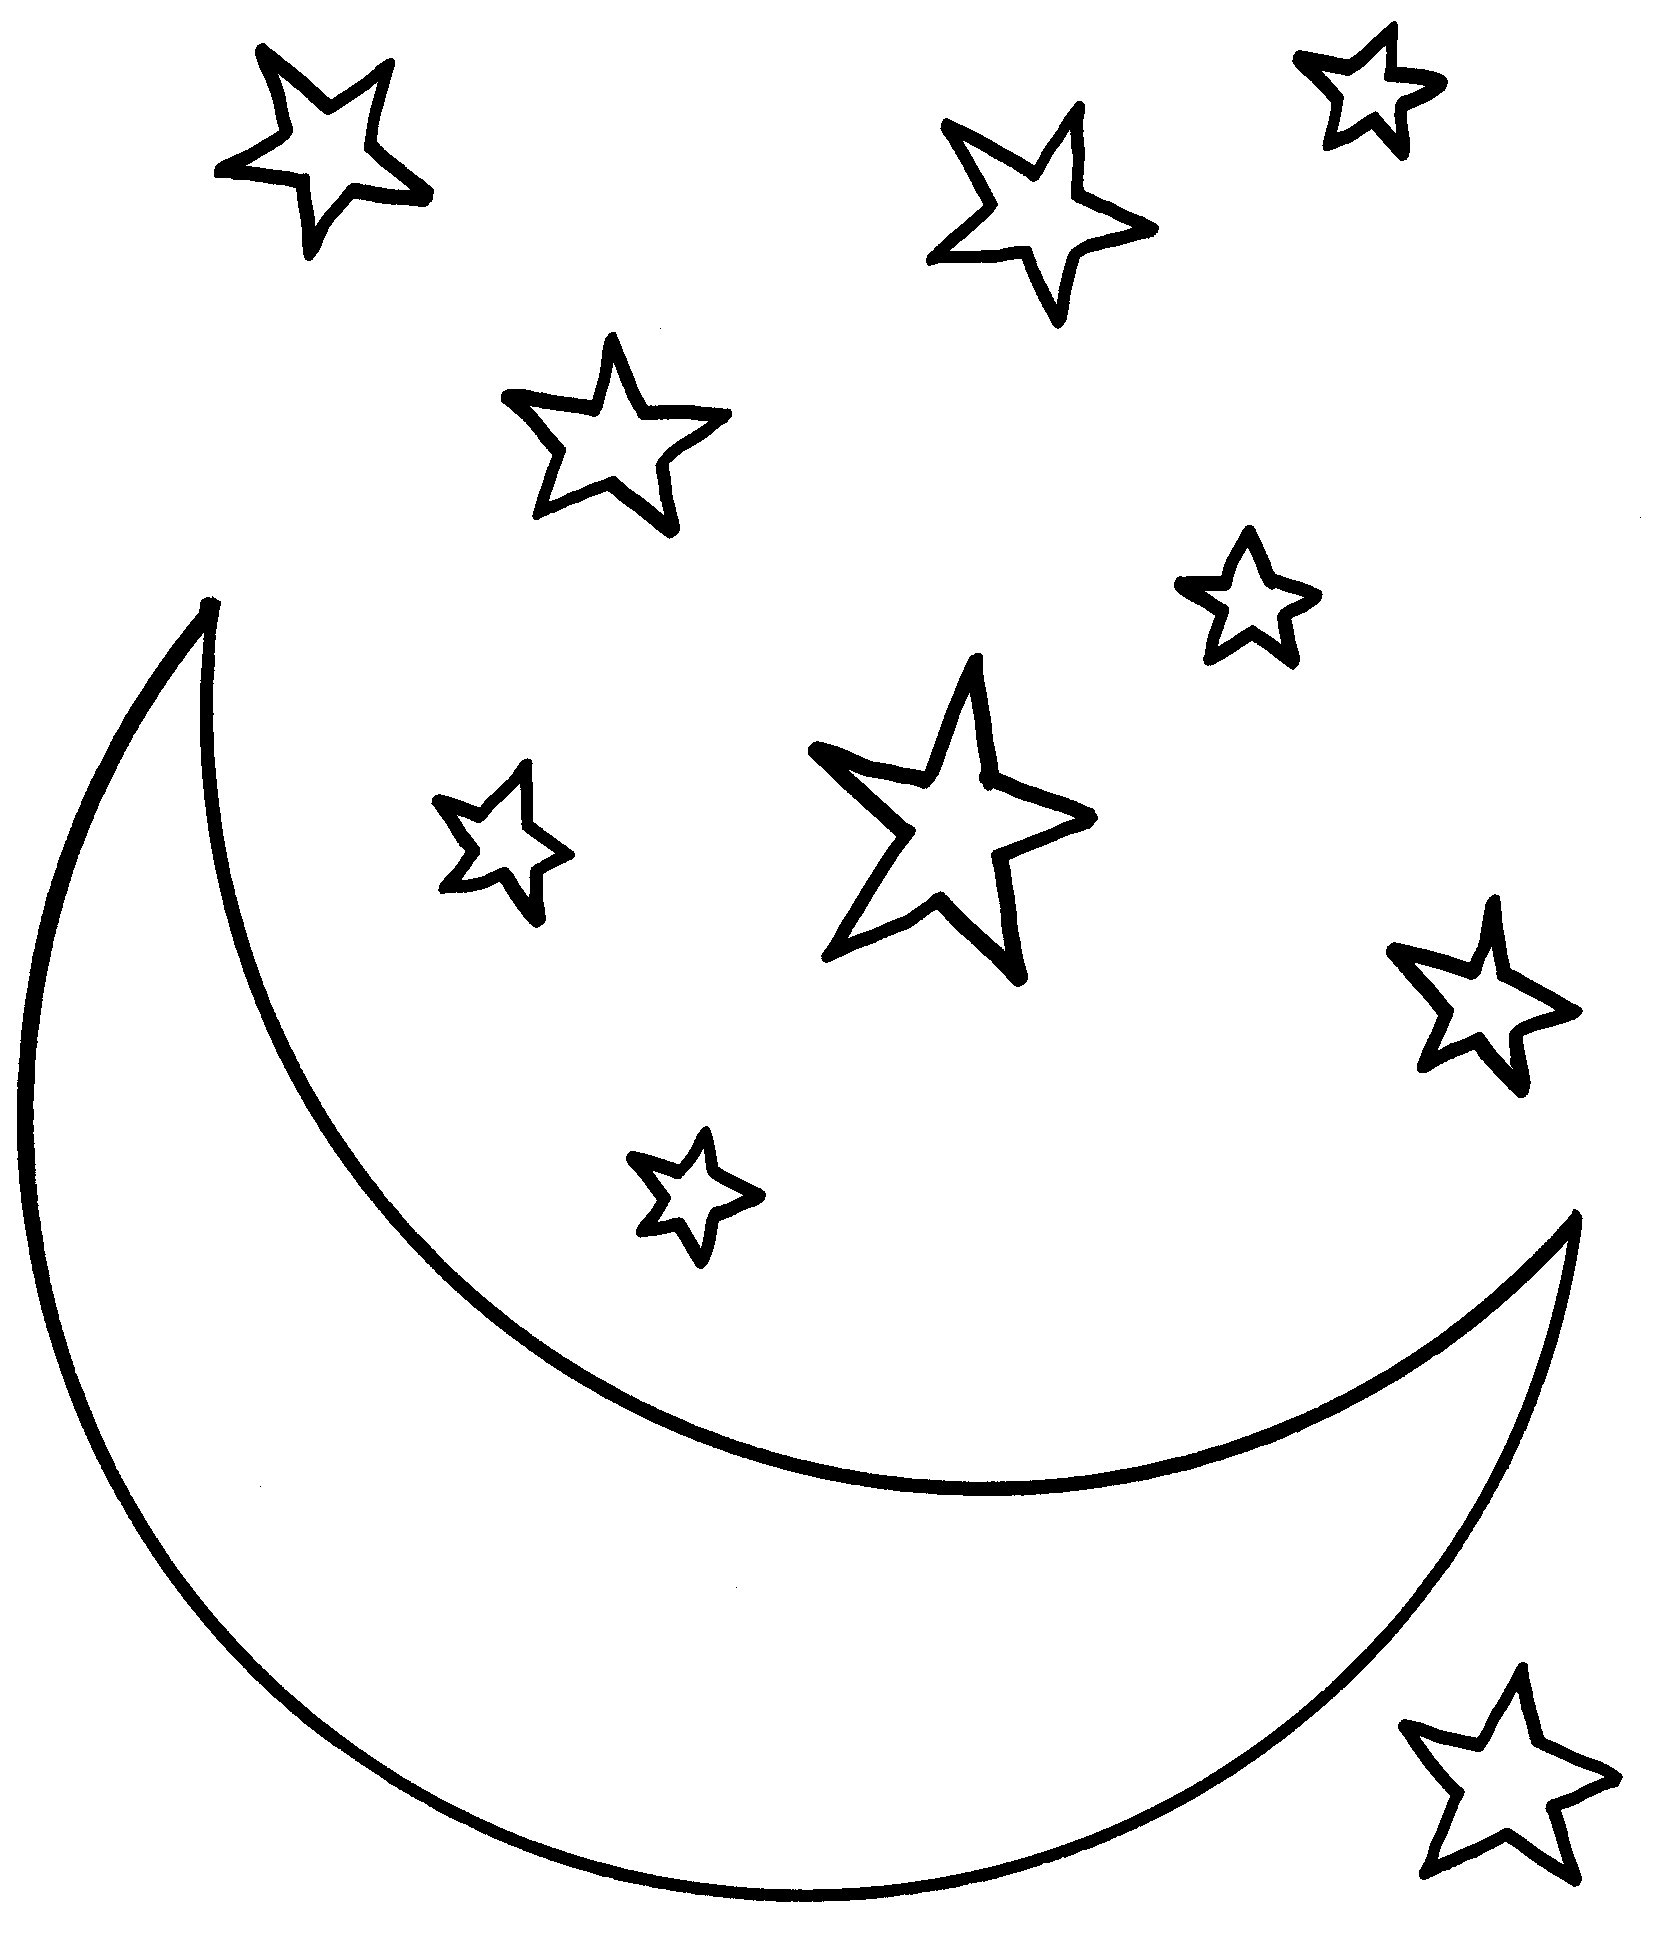 sun and moon clipart black and white